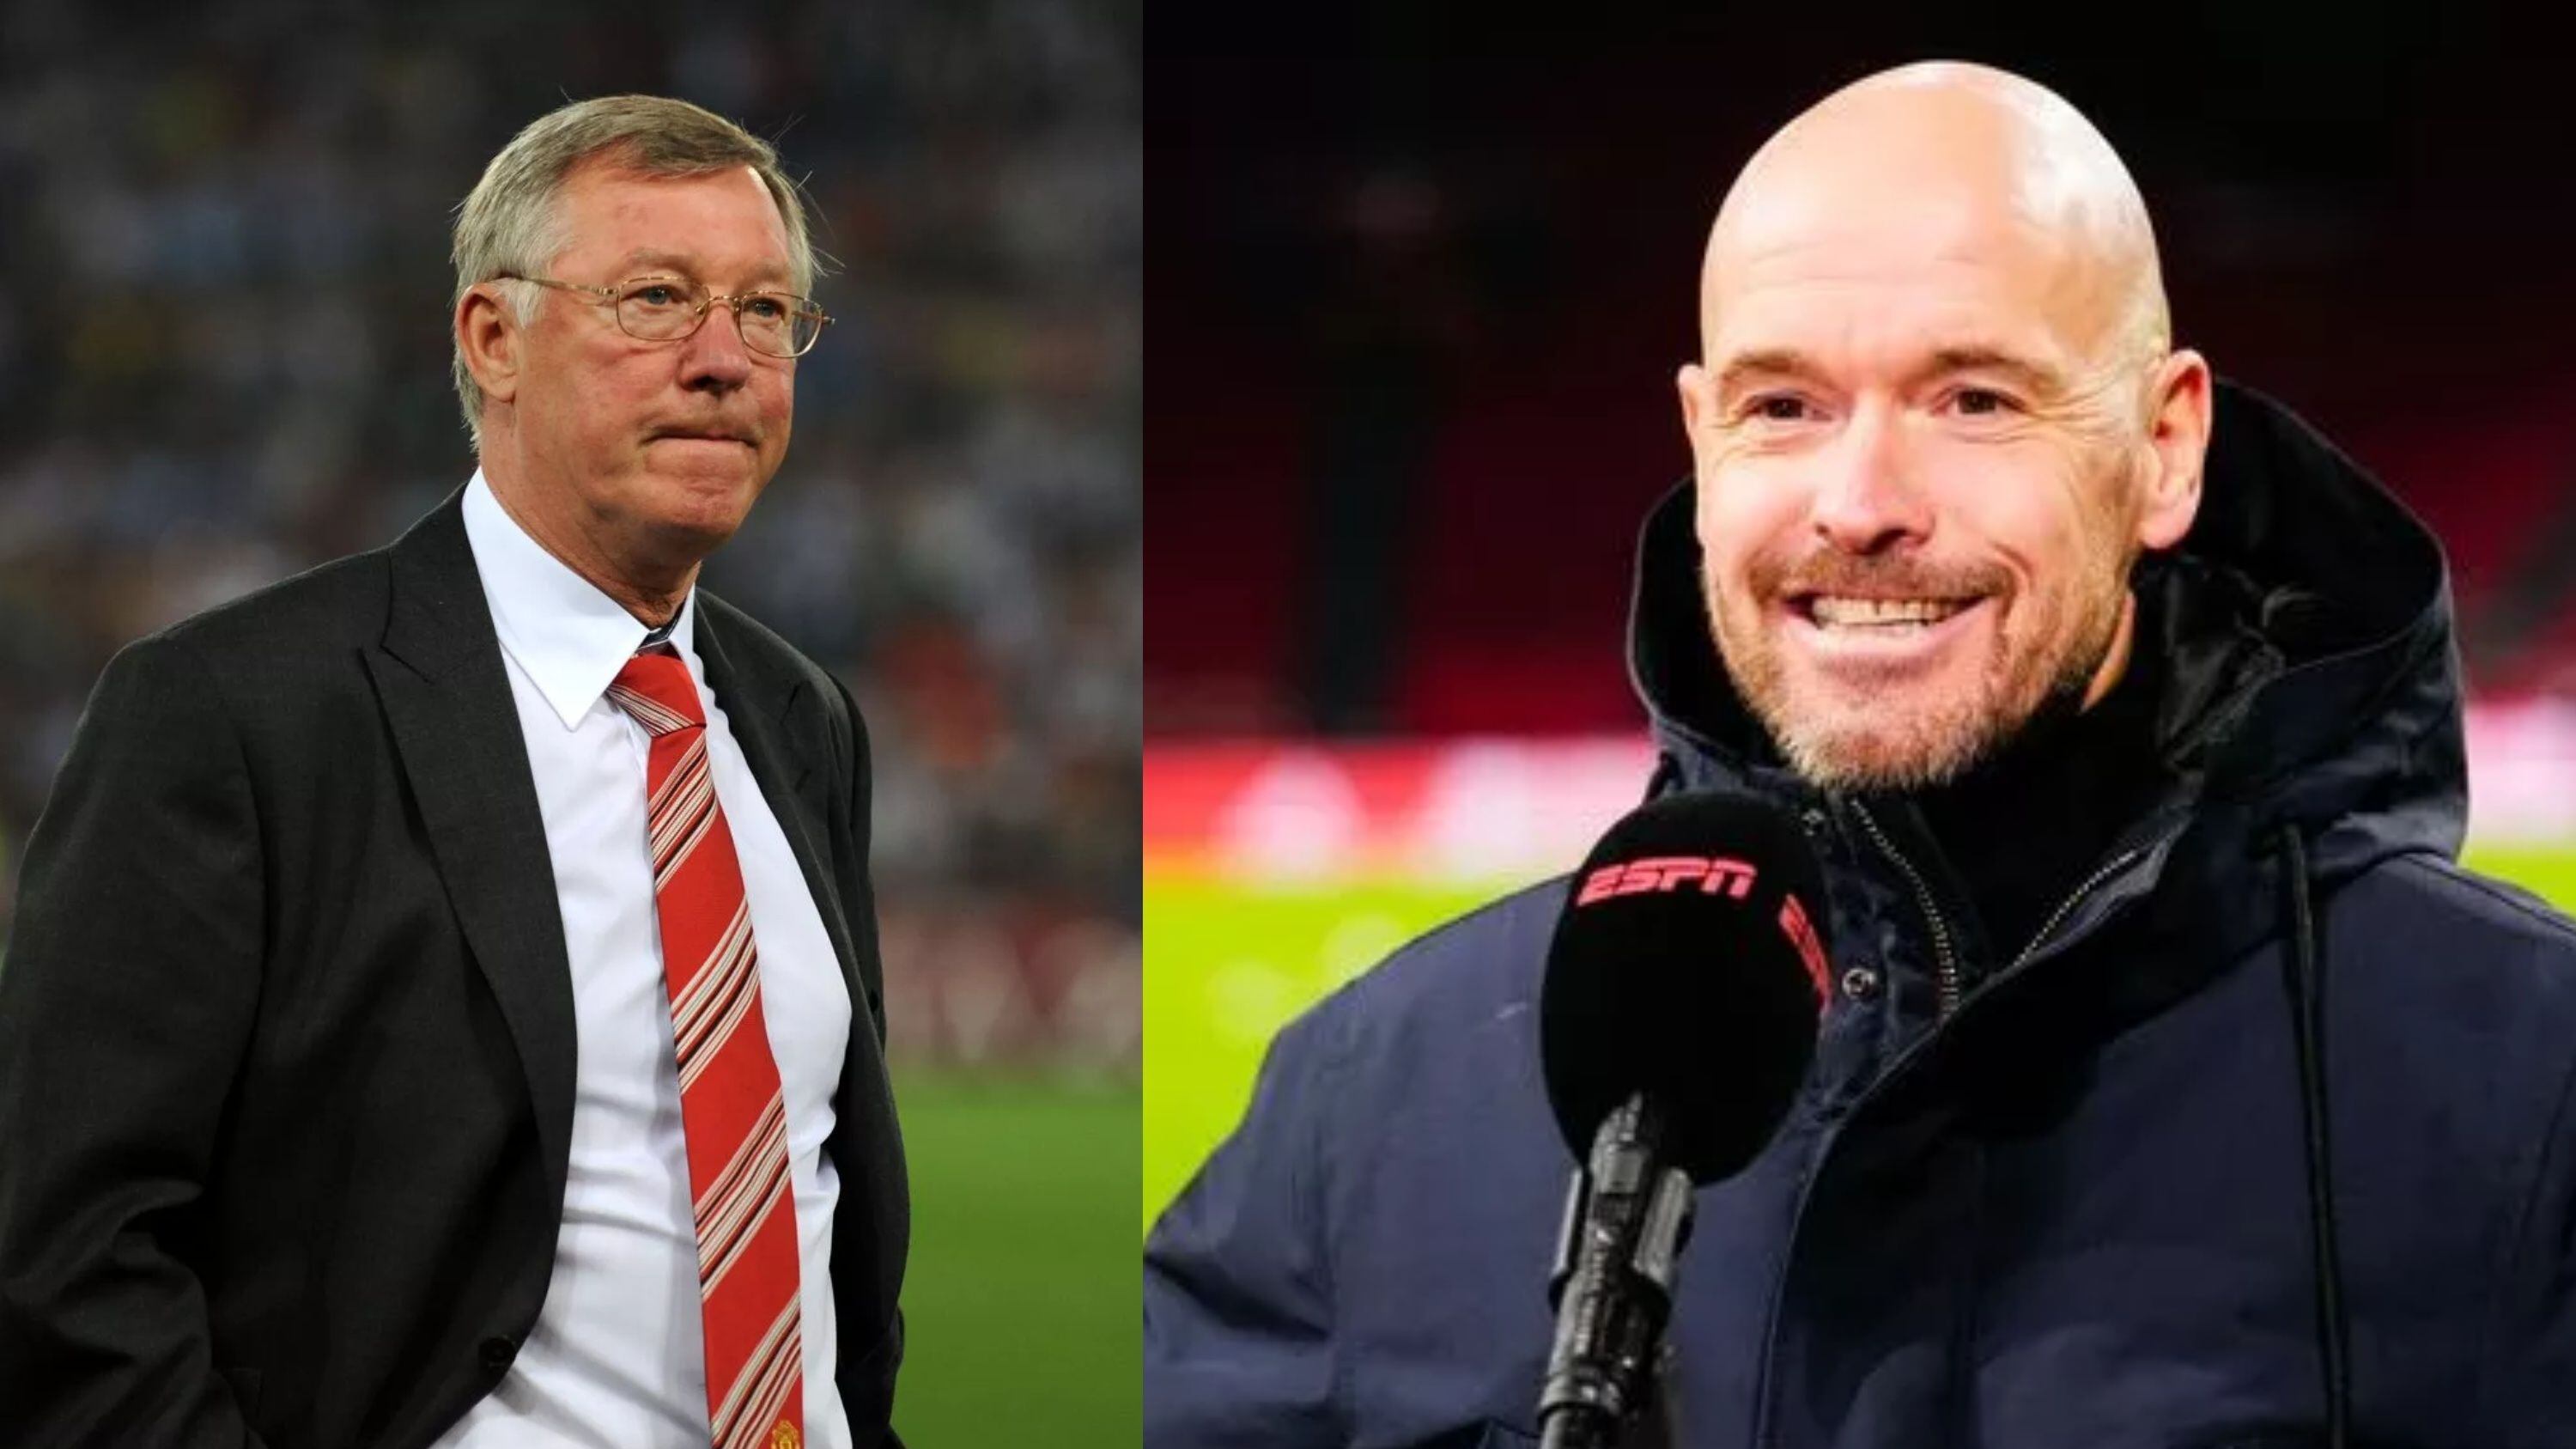 He was Ferguson's favorite, now Ten Hag pulls him out of Manchester United